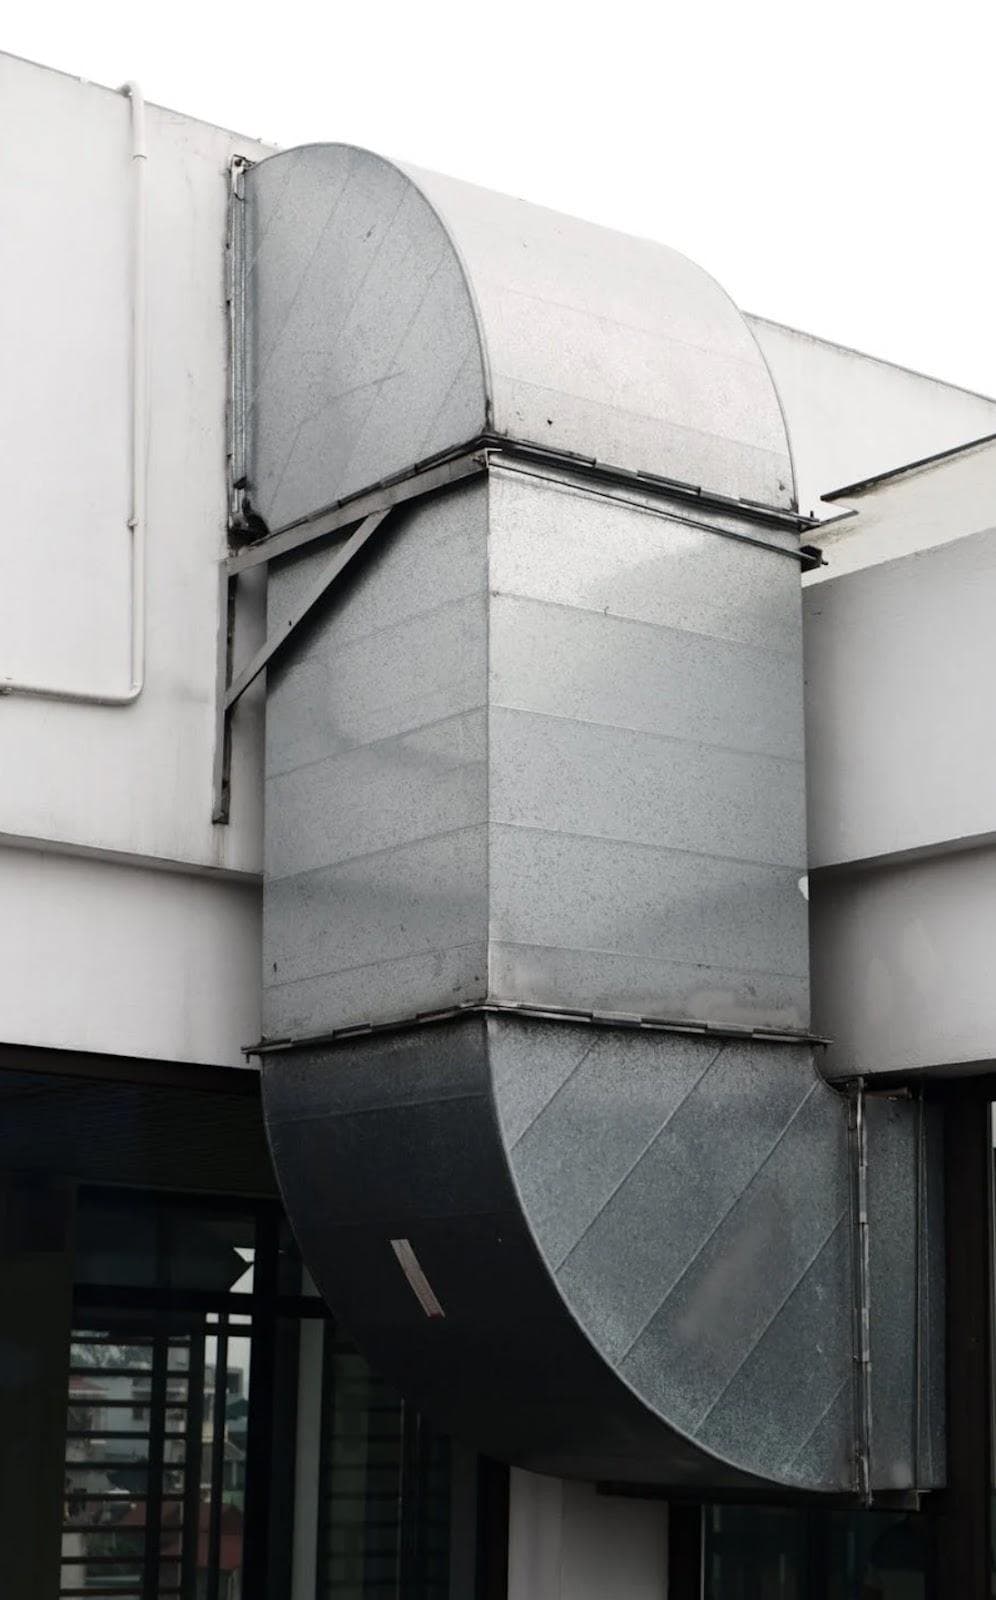 Metal ductwork on the exterior of a modern building